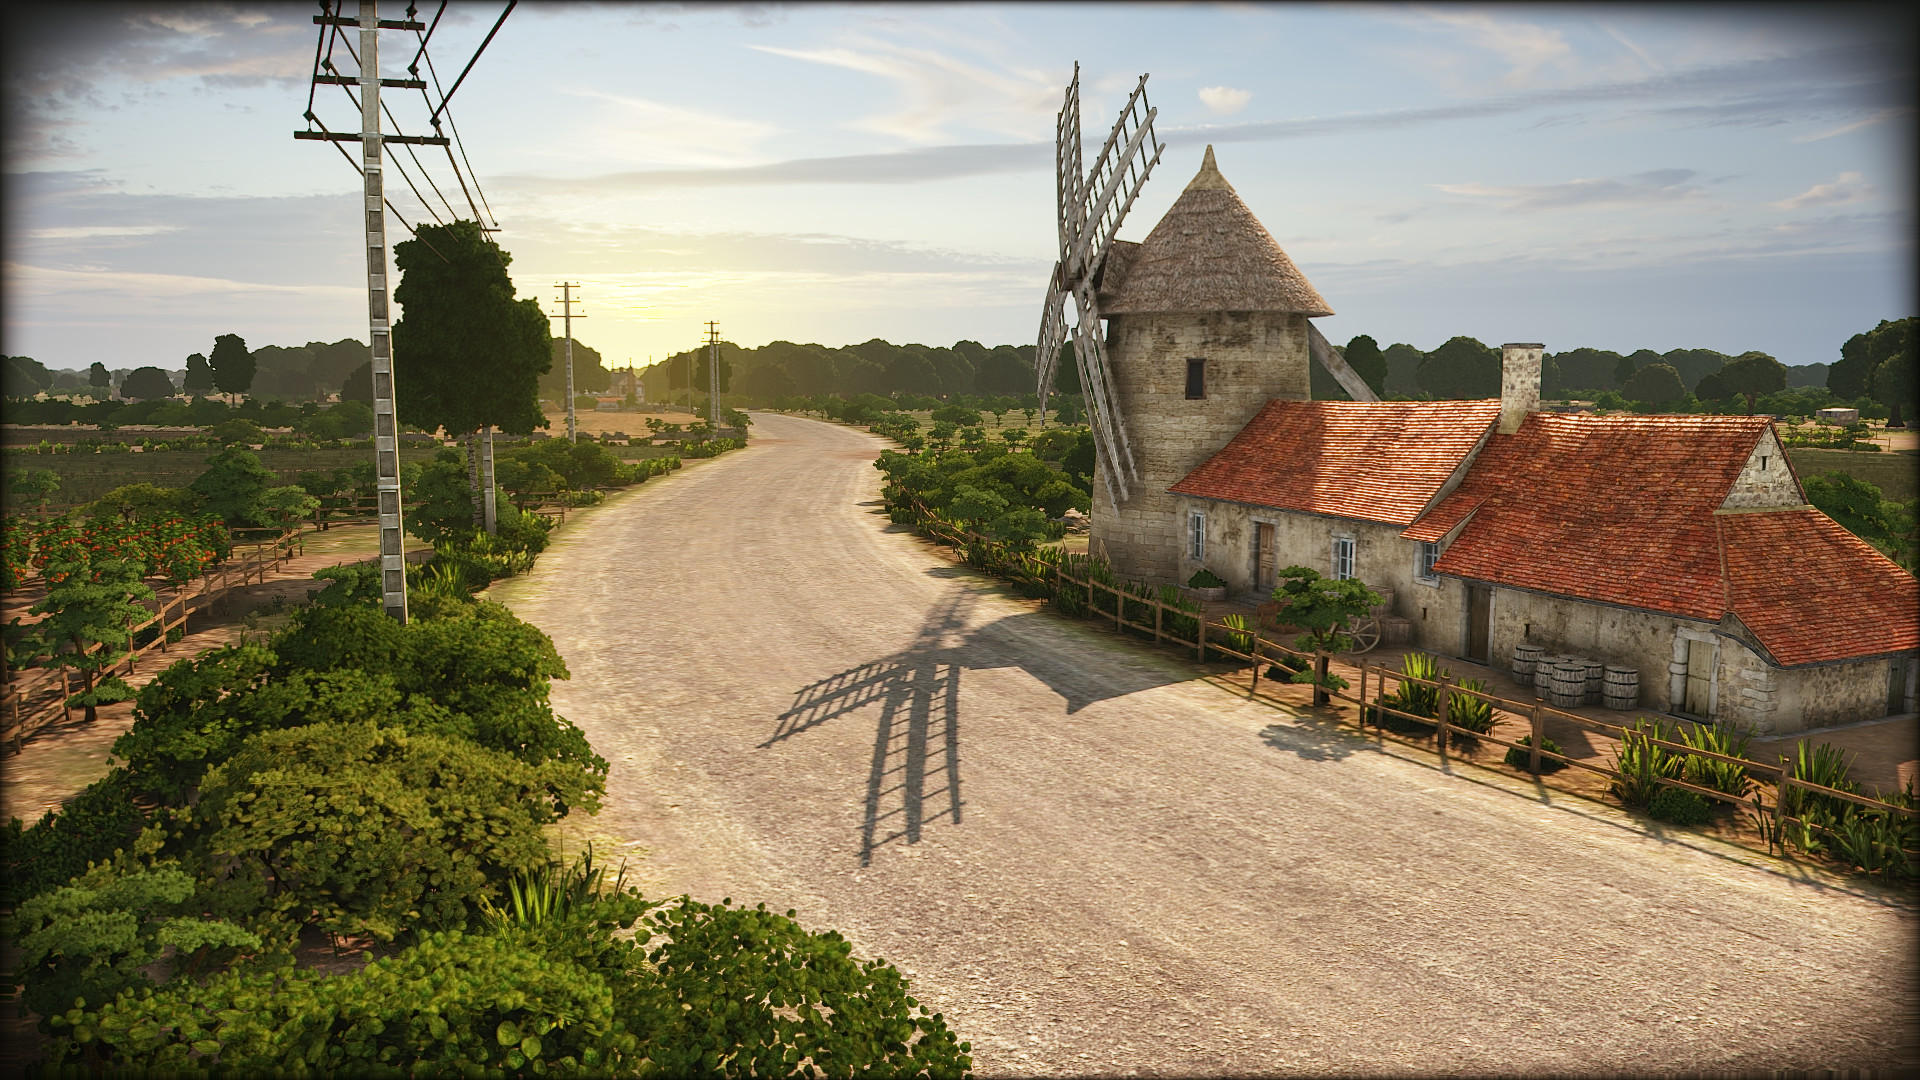 Steel Division: Normandy 44 - Deluxe Edition Upgrade Pack screenshot